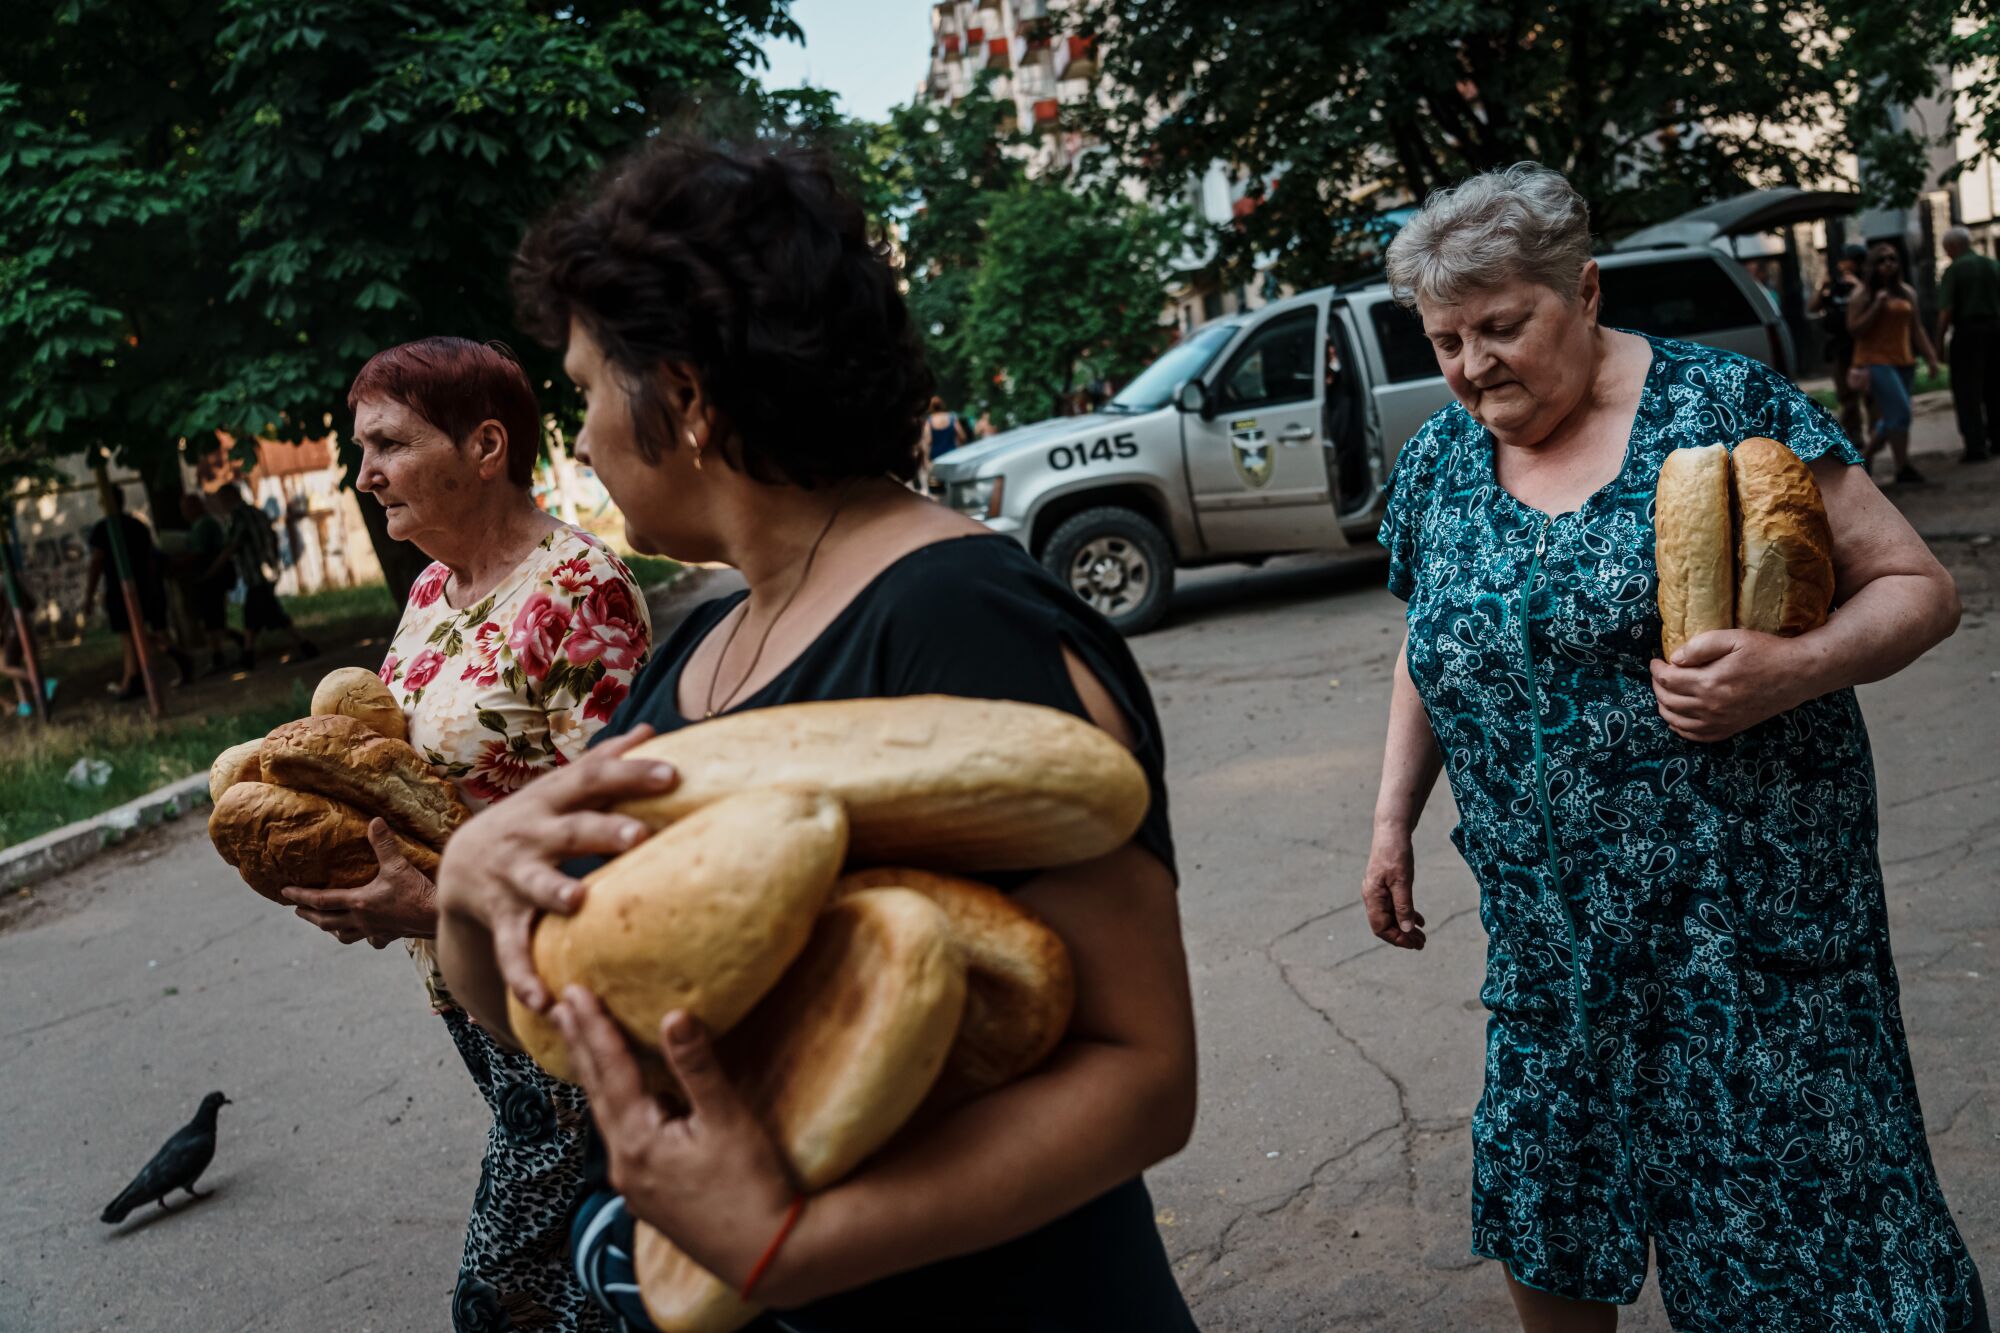 Residents carry food given to them by police officers in Lysychansk, Ukraine.